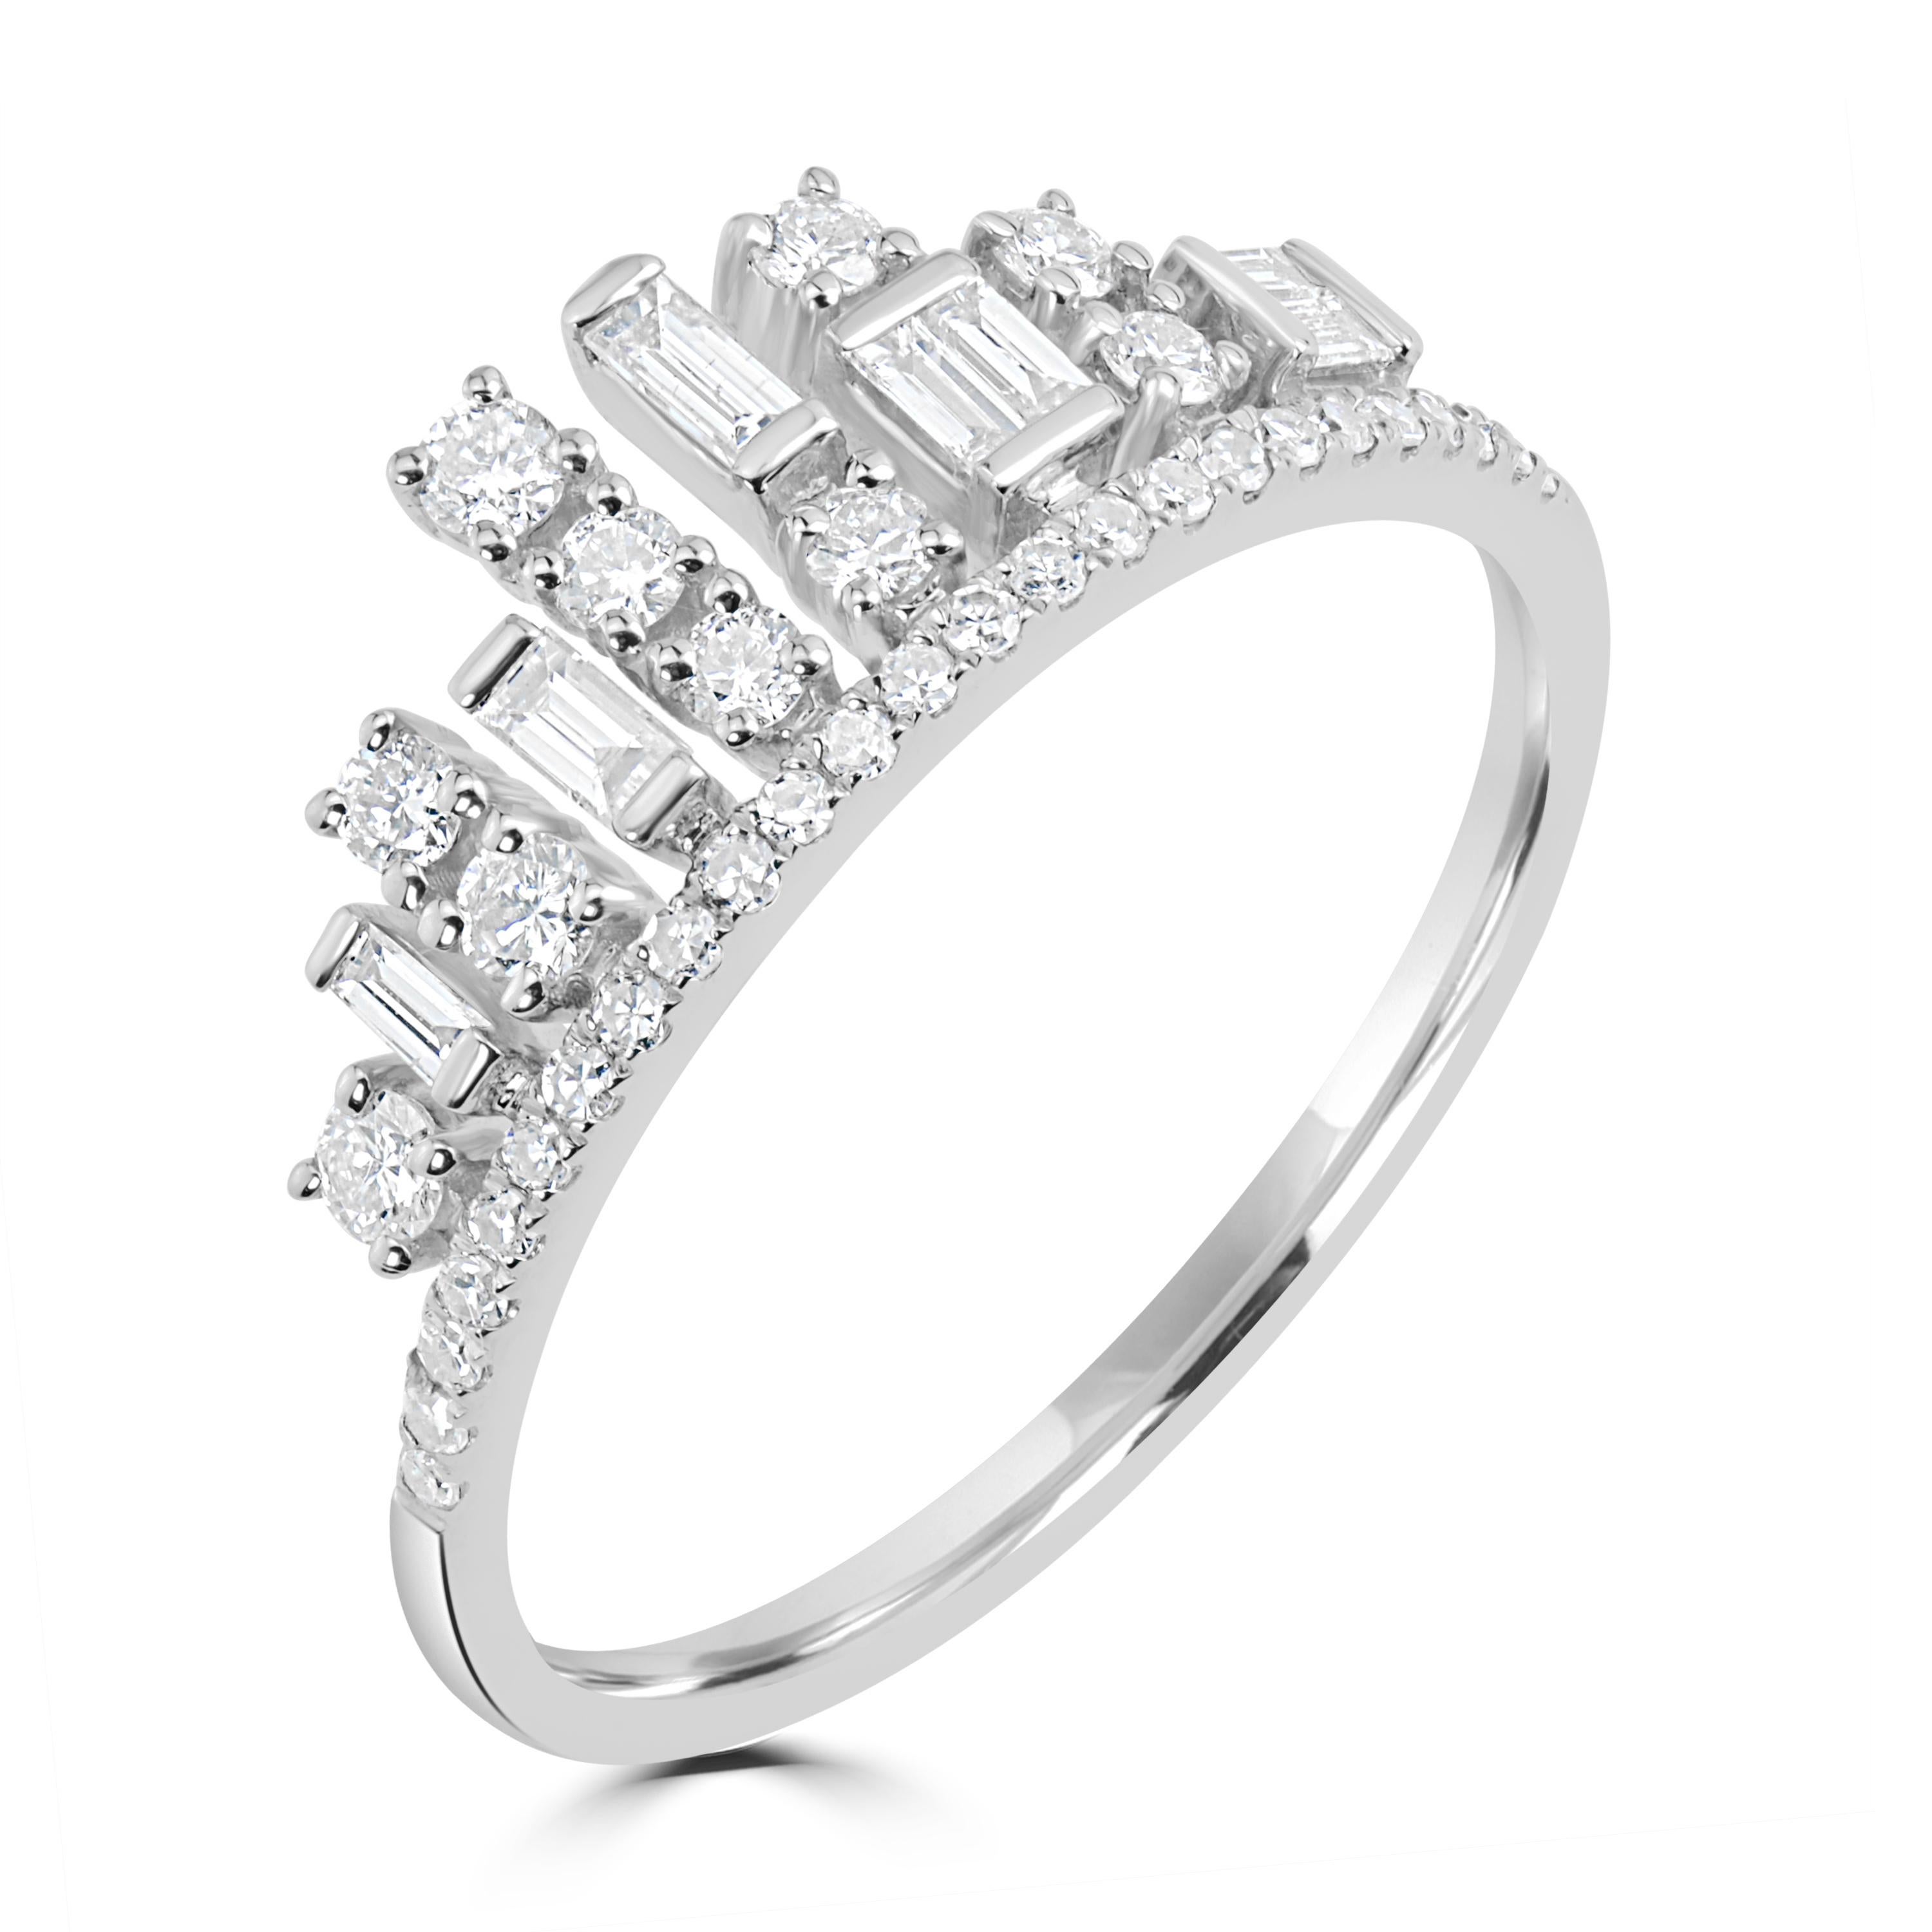 This Luxle ring features alternating sections of 0.31Ct total weight of baguette and round cut diamonds giving the perfect touch of sparkle for everyday wear in 18K white gold.

Please follow the Luxury Jewels storefront to view the latest